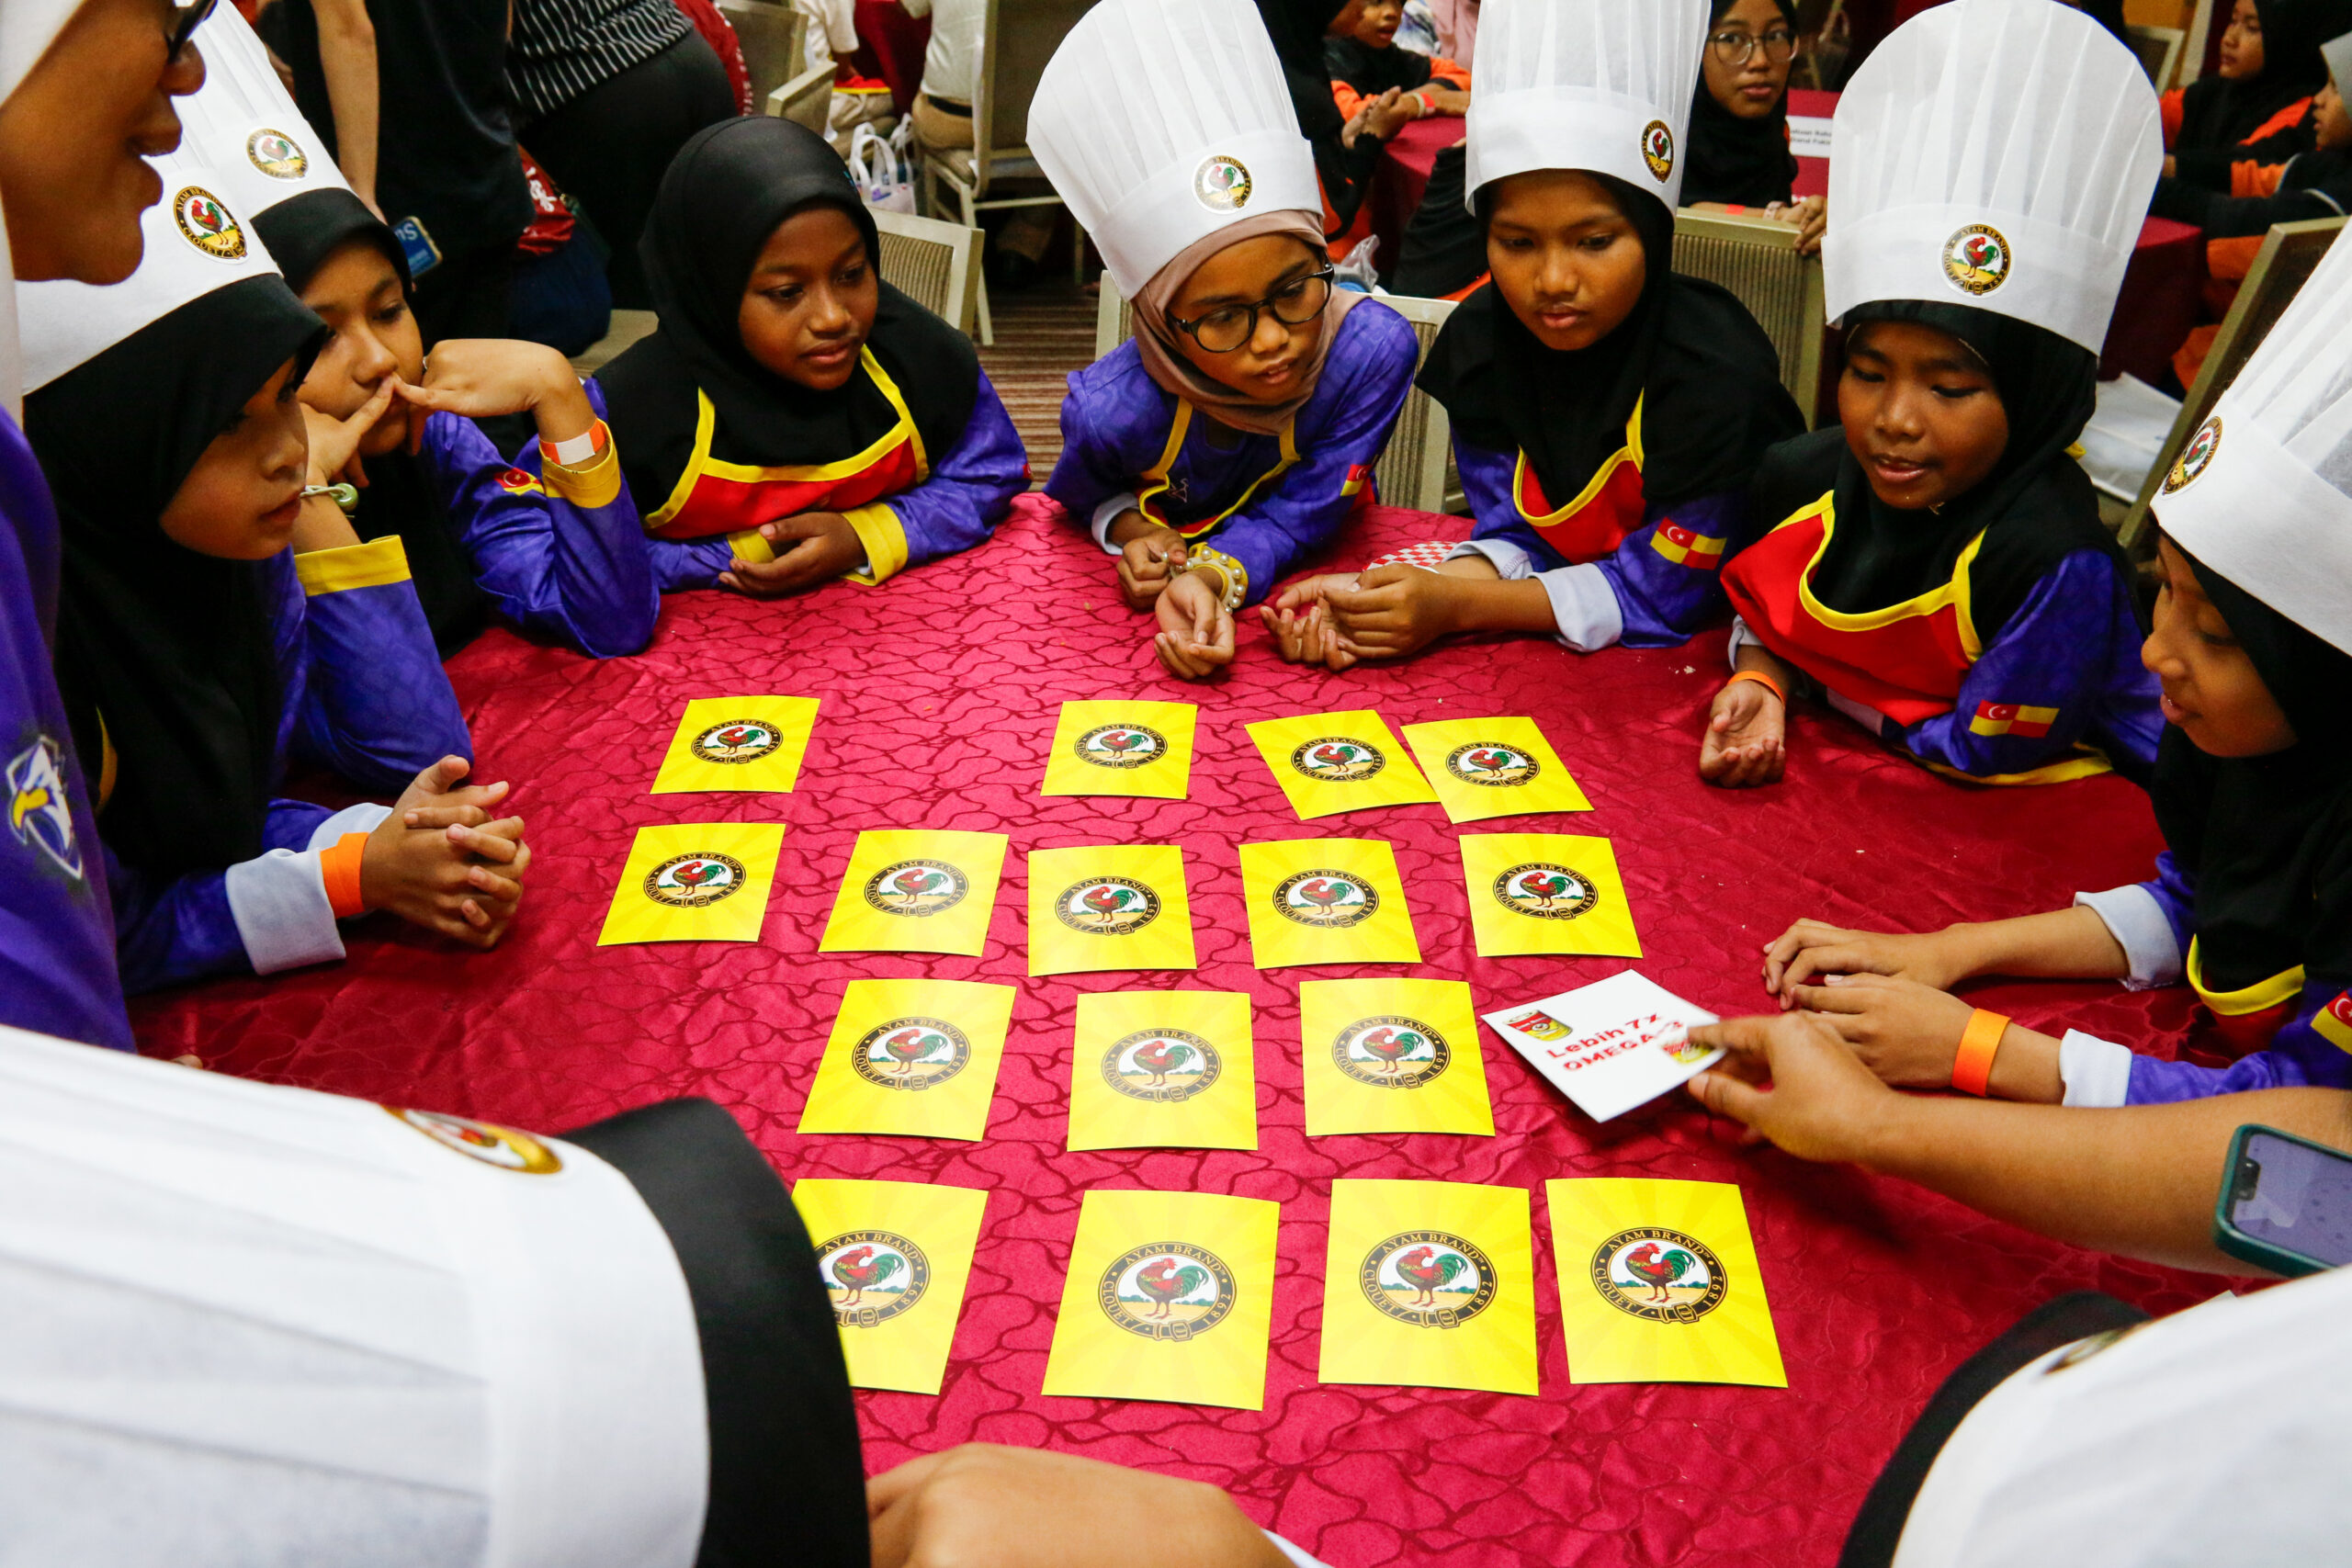 Ayam brand™ community care campaign 2023 empowers 1,000 children for a better future | weirdkaya